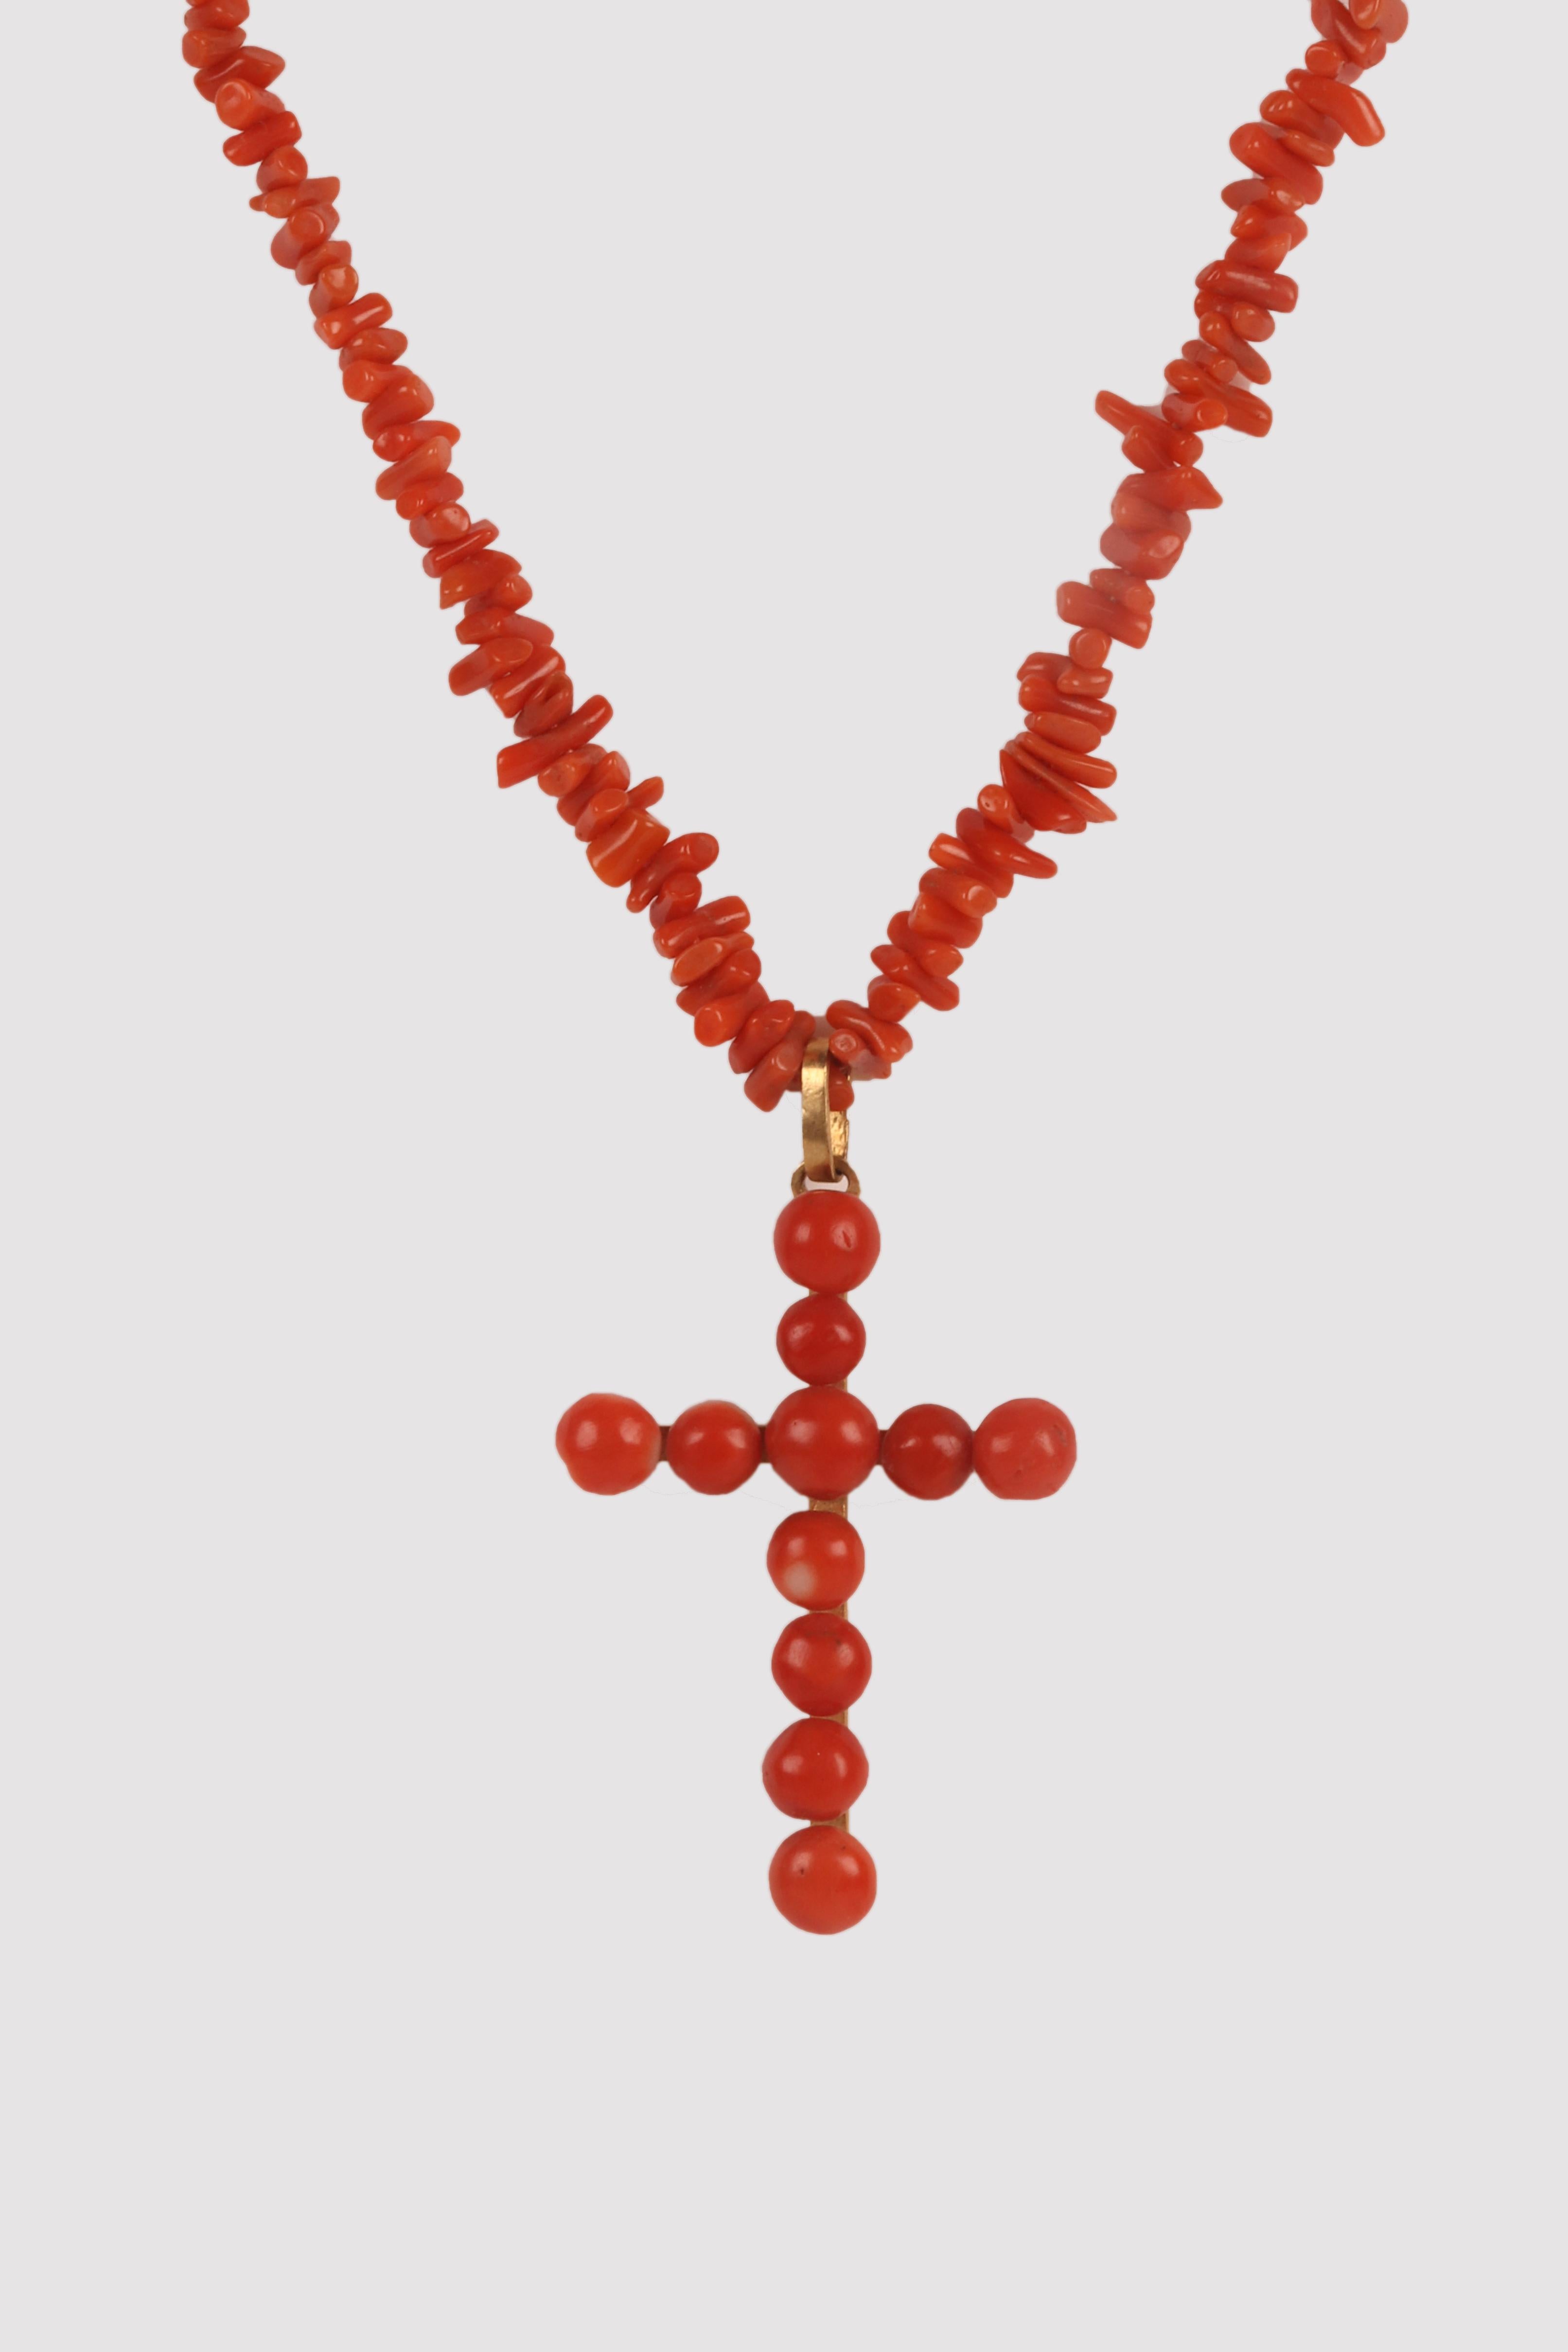 English Cross necklace. Mediterranean coral from Sciacca, England 1880. For Sale